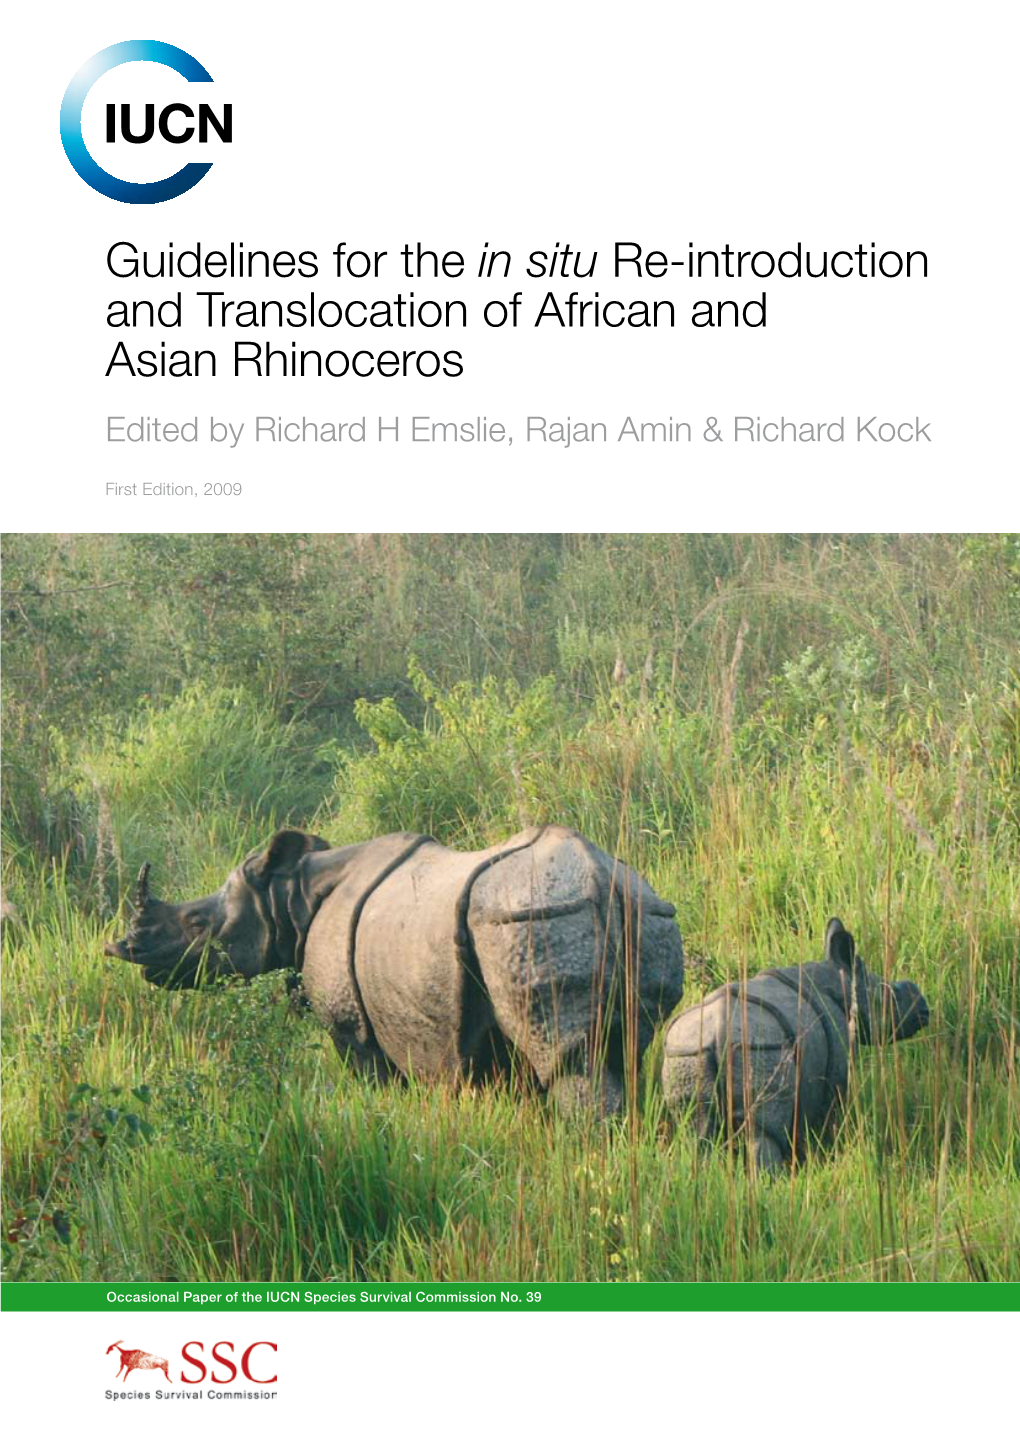 Guidelines for the in Situ Re-Introduction and Translocation of African and Asian Rhinoceros Edited by Richard H Emslie, Rajan Amin & Richard Kock